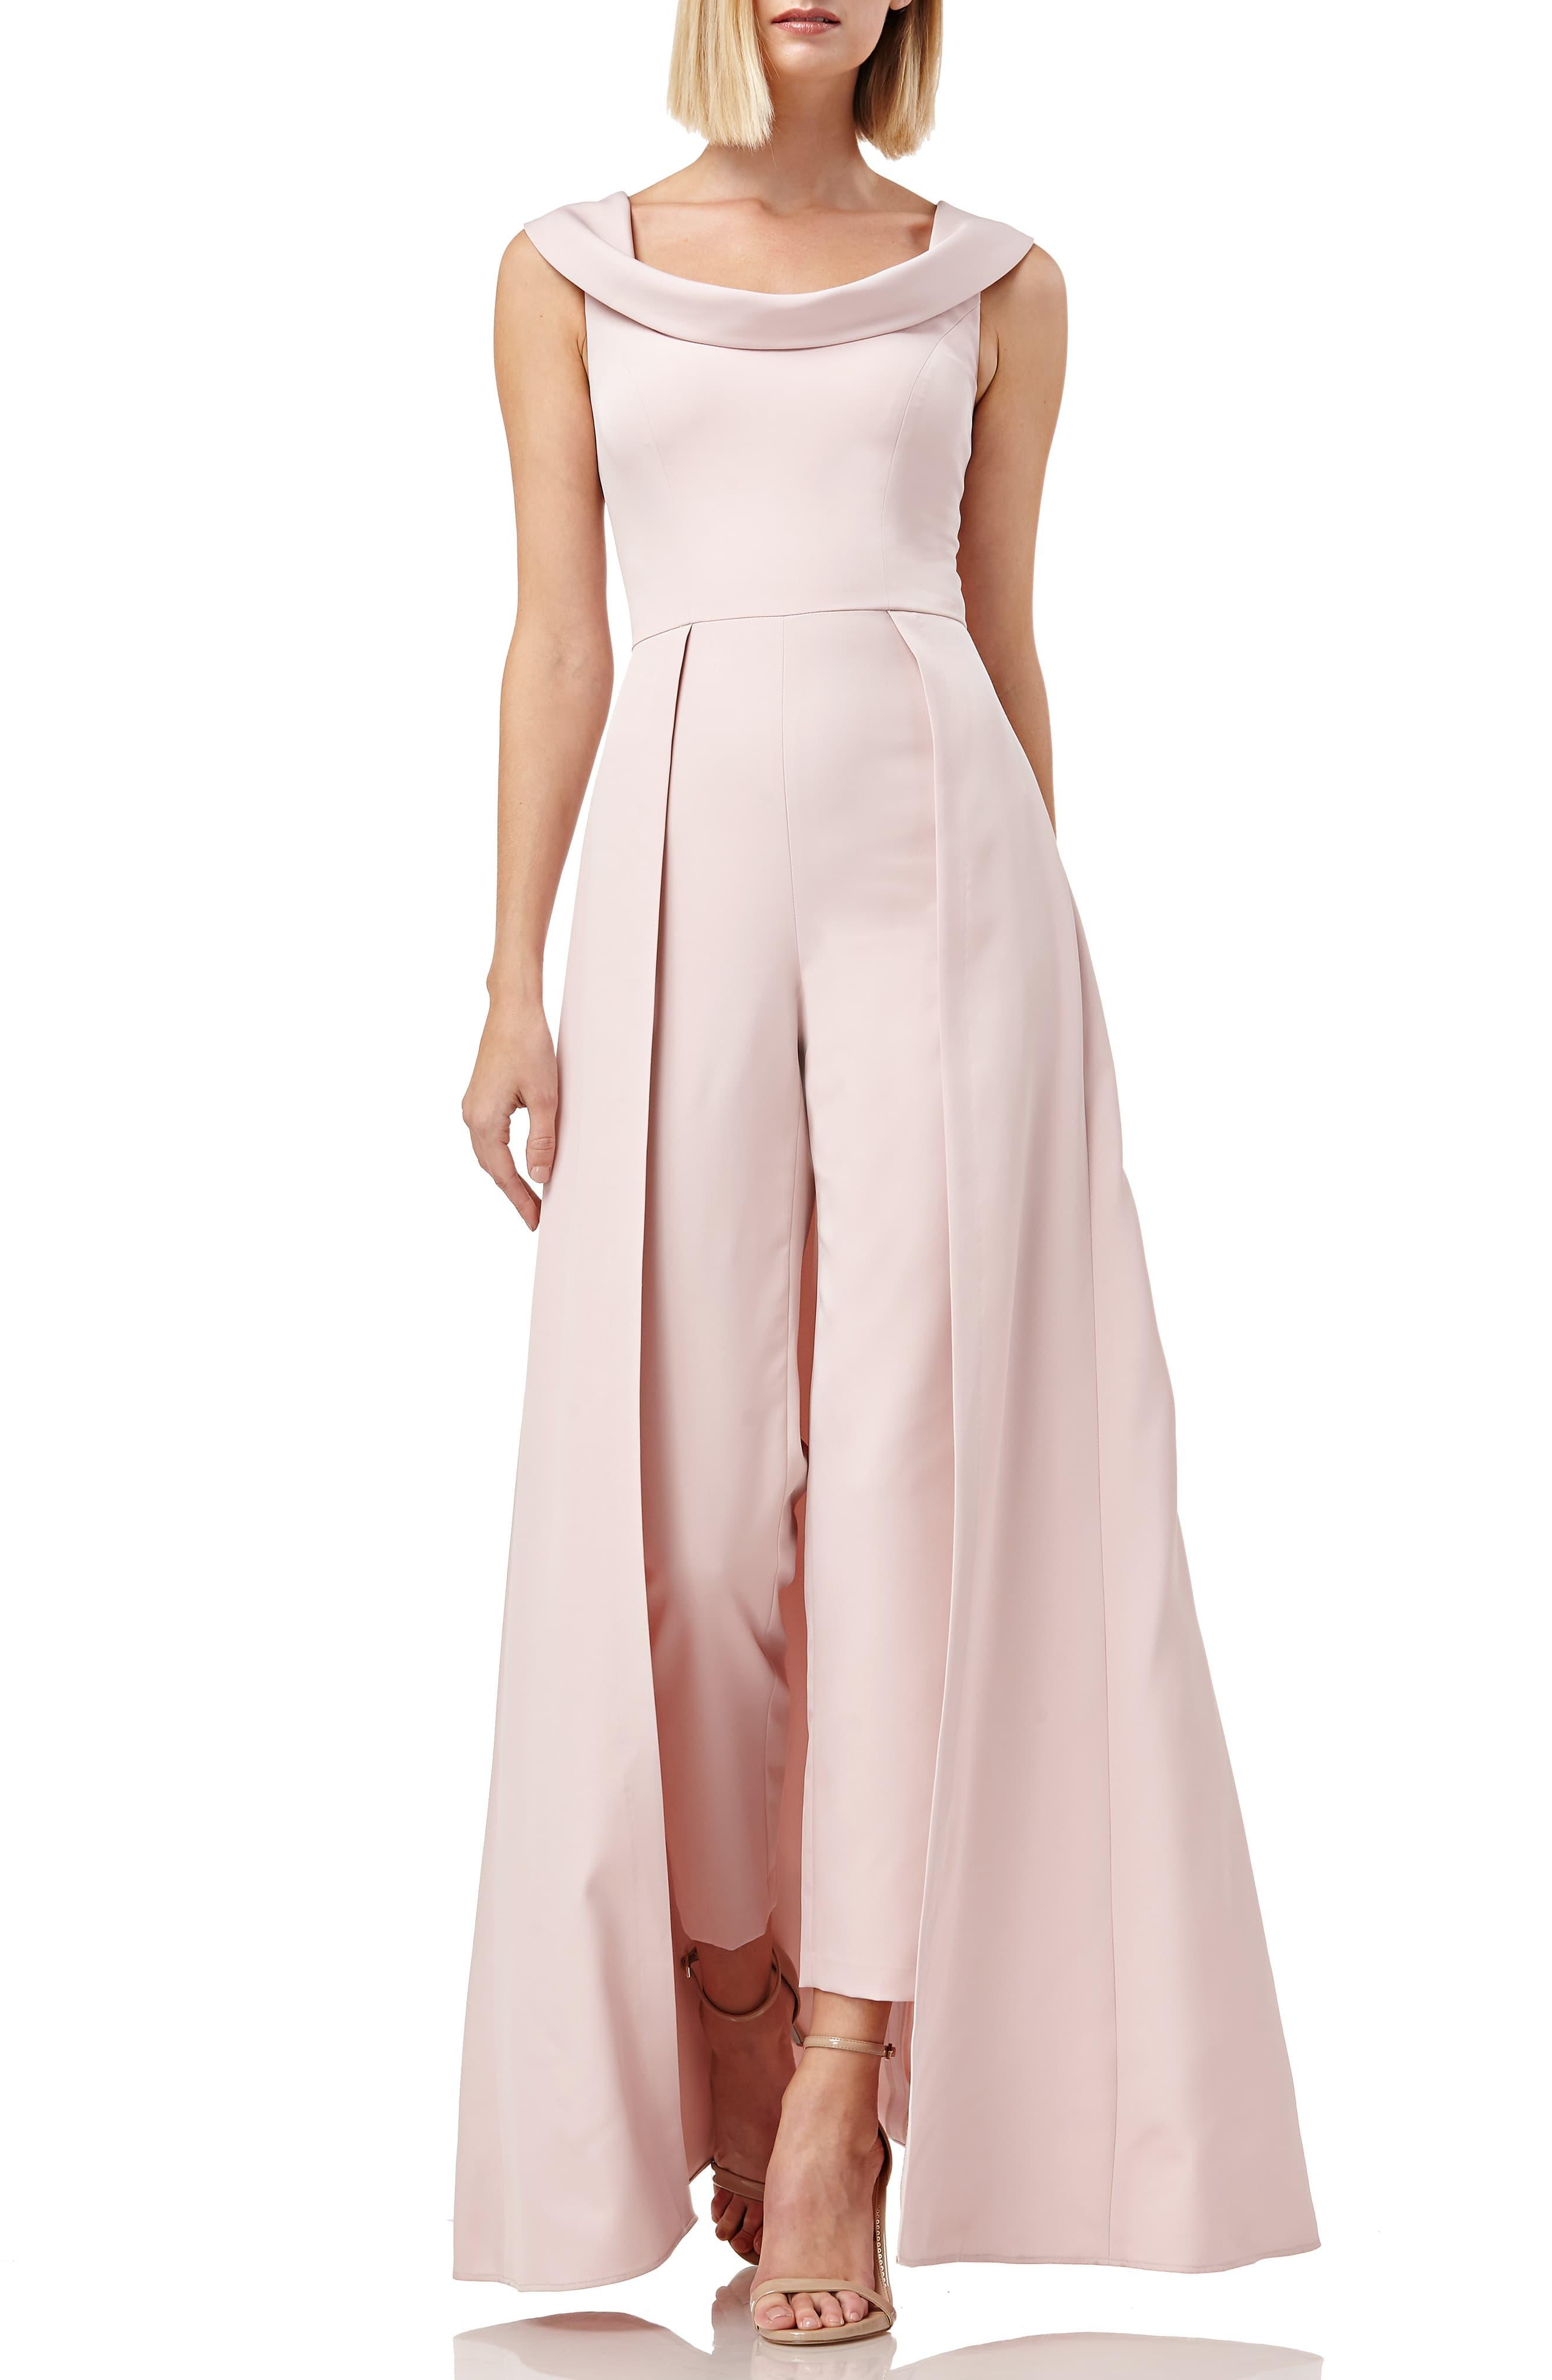 Kay Unger Jumpsuit Gown in Blush (Pink) - Lyst